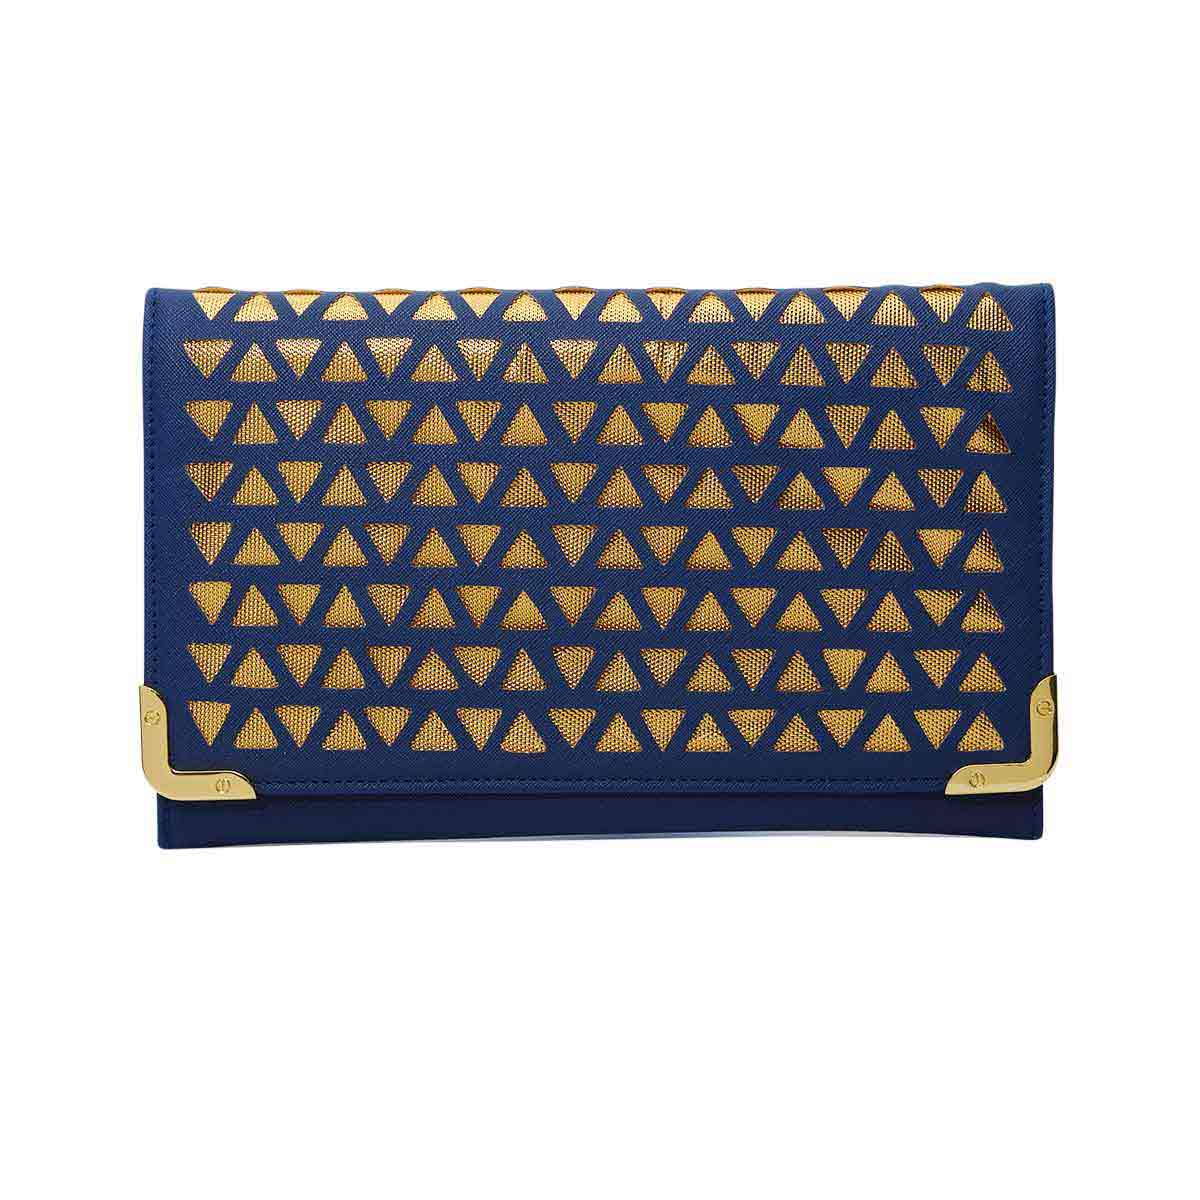 Nisha bag Faux leather Navy blue and gold pochette with chain strap. Hook on strap for multiple positions. Rani collection by Veronica Tharmalingam.Front view of the handbag